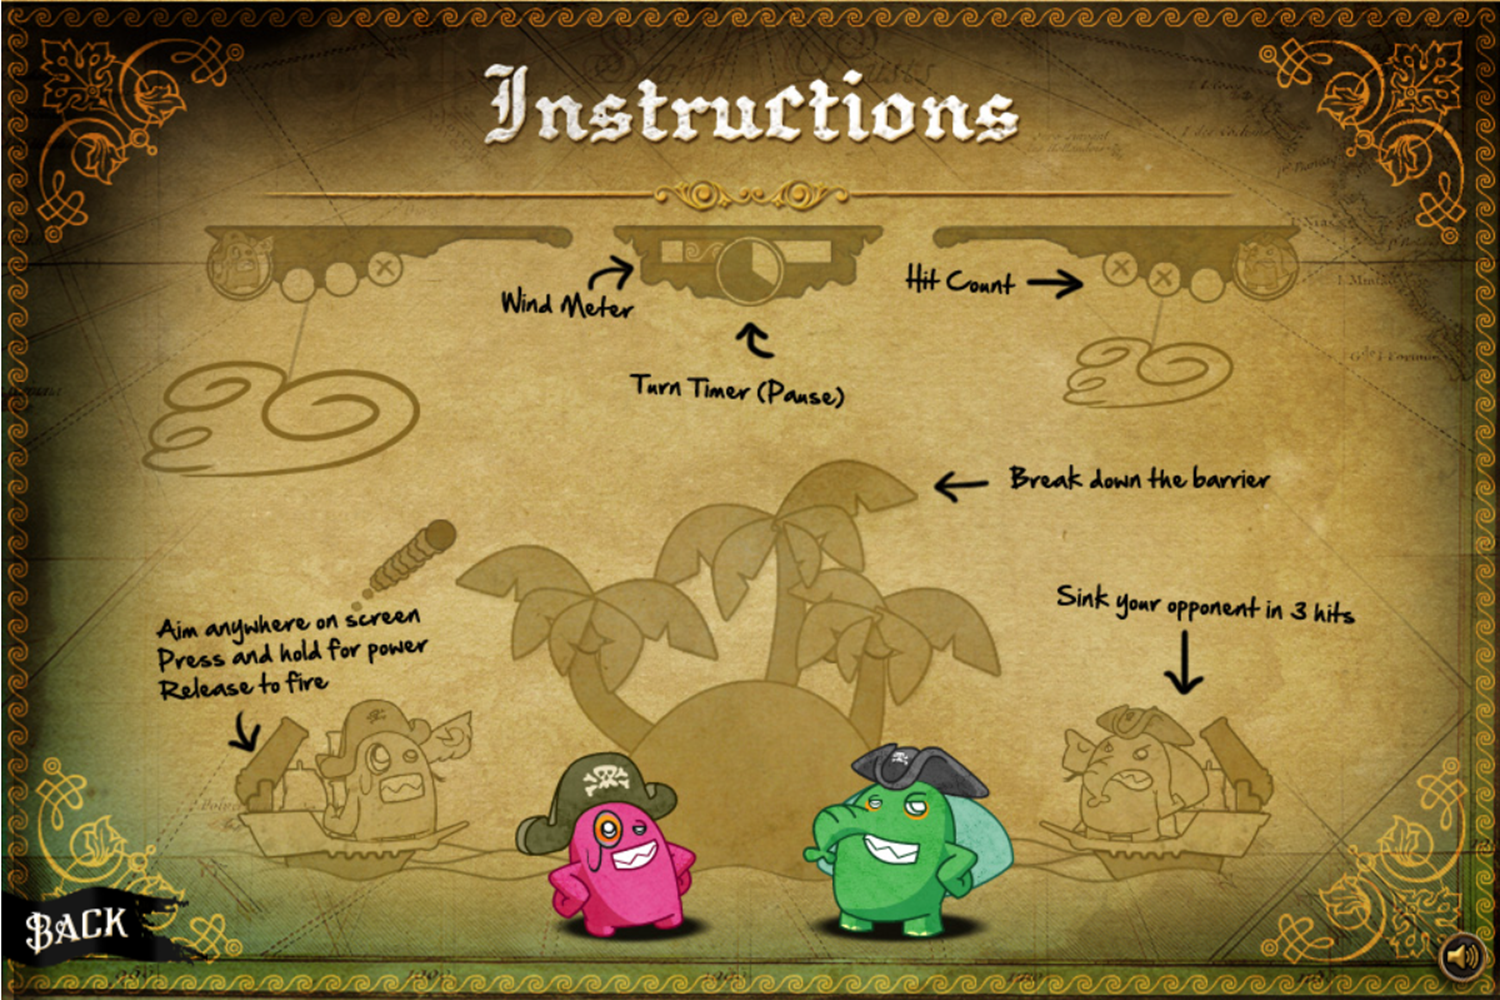 Lux Ahoy Game Instructions Screenshot.